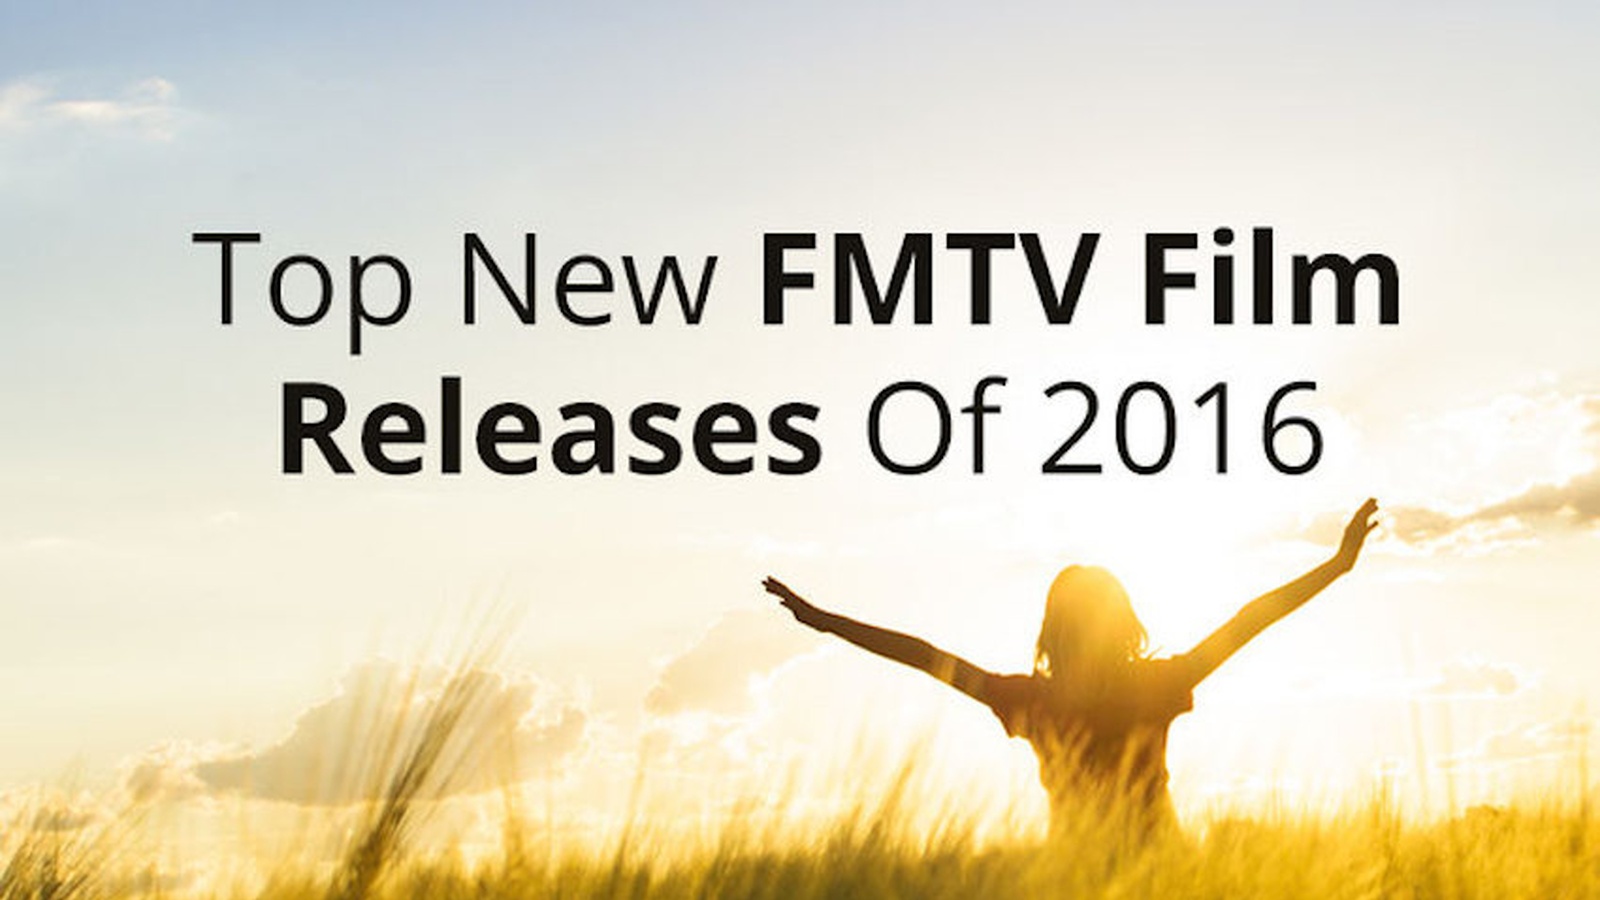 Top New FMTV Film Releases Of 2016 